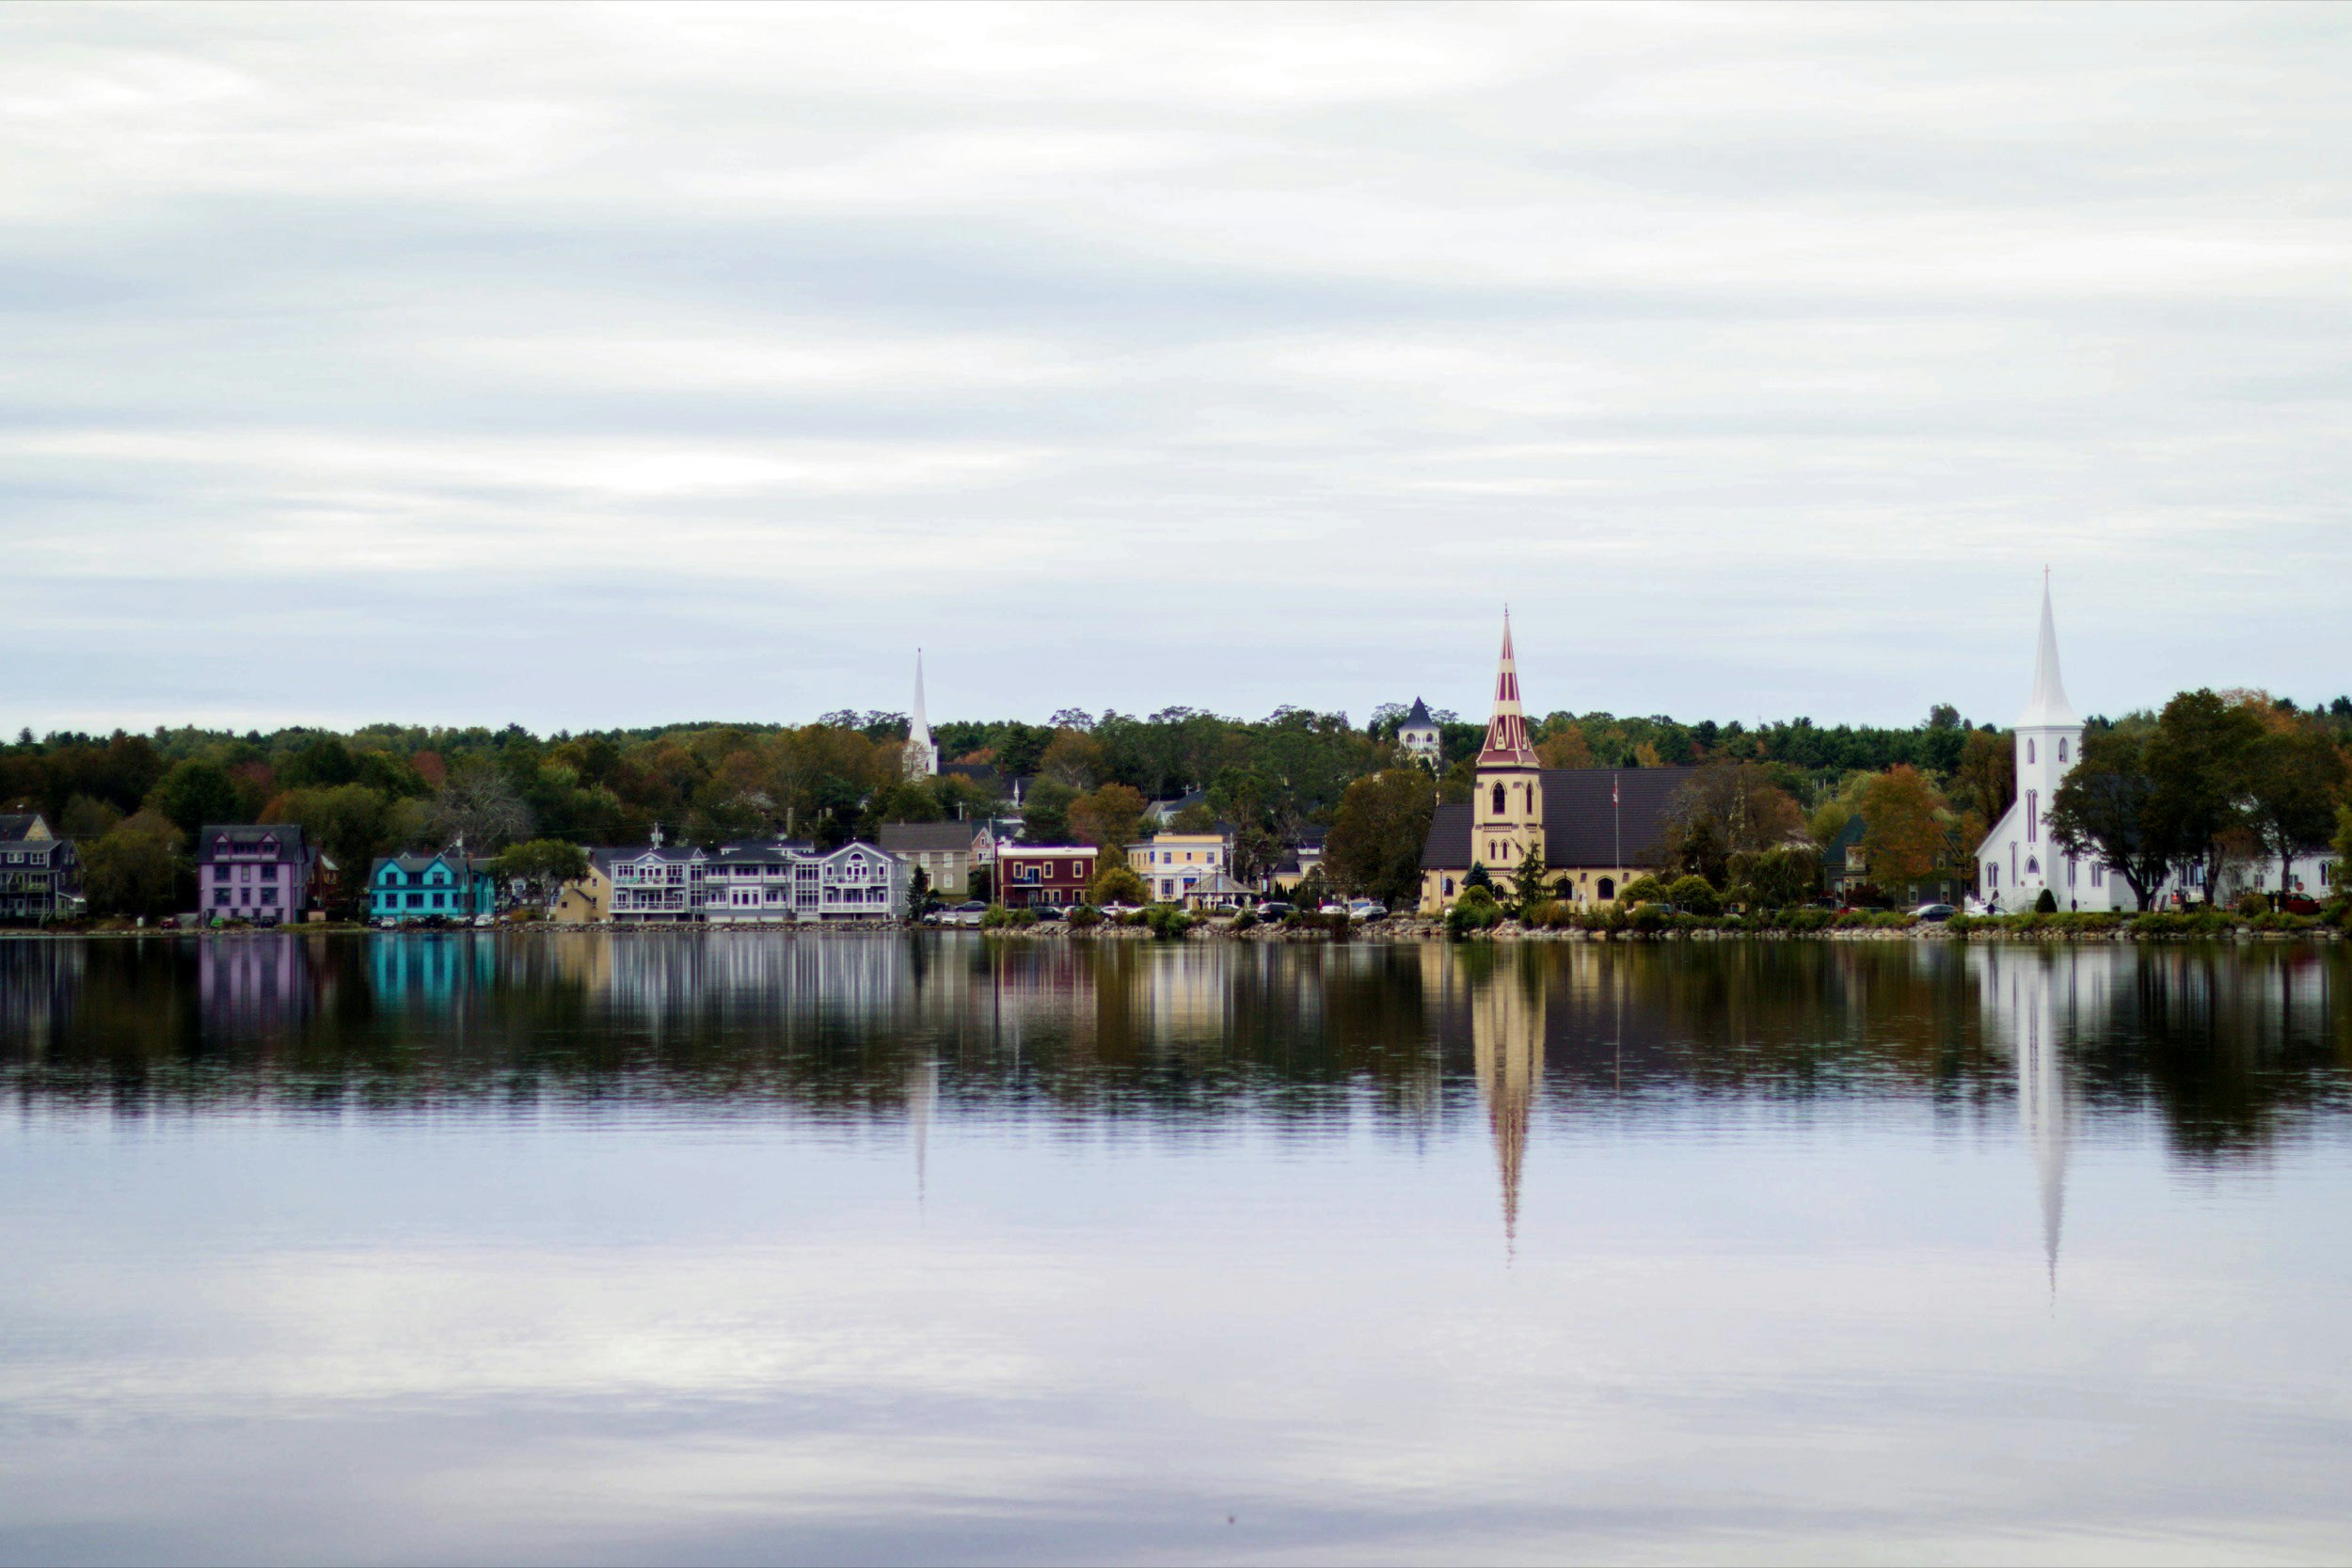 Looking across water, three church spires are reflected in the water in the foreground, as well as other smaller buildings near Halifax, Nova Scotia